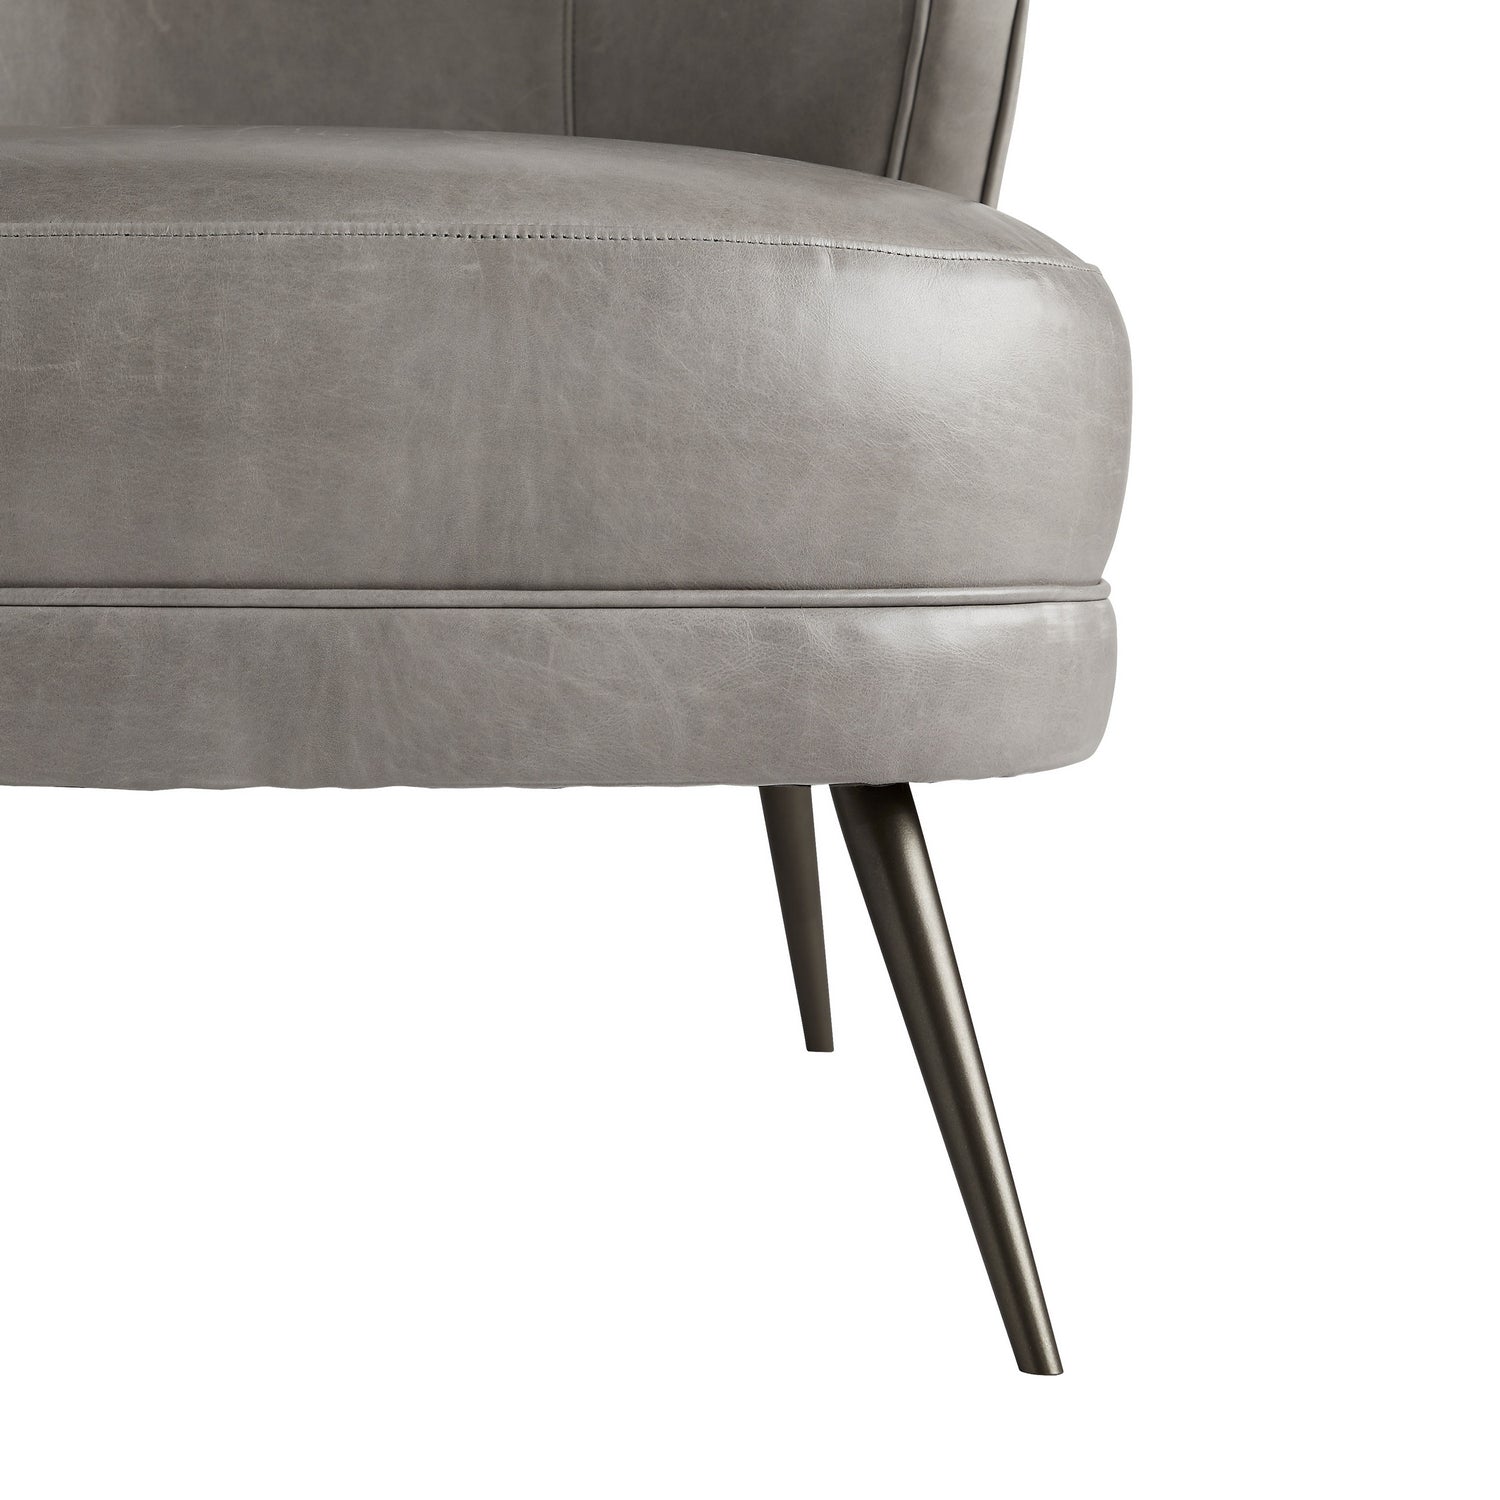 Chair from the Kitts collection in Mineral Grey finish